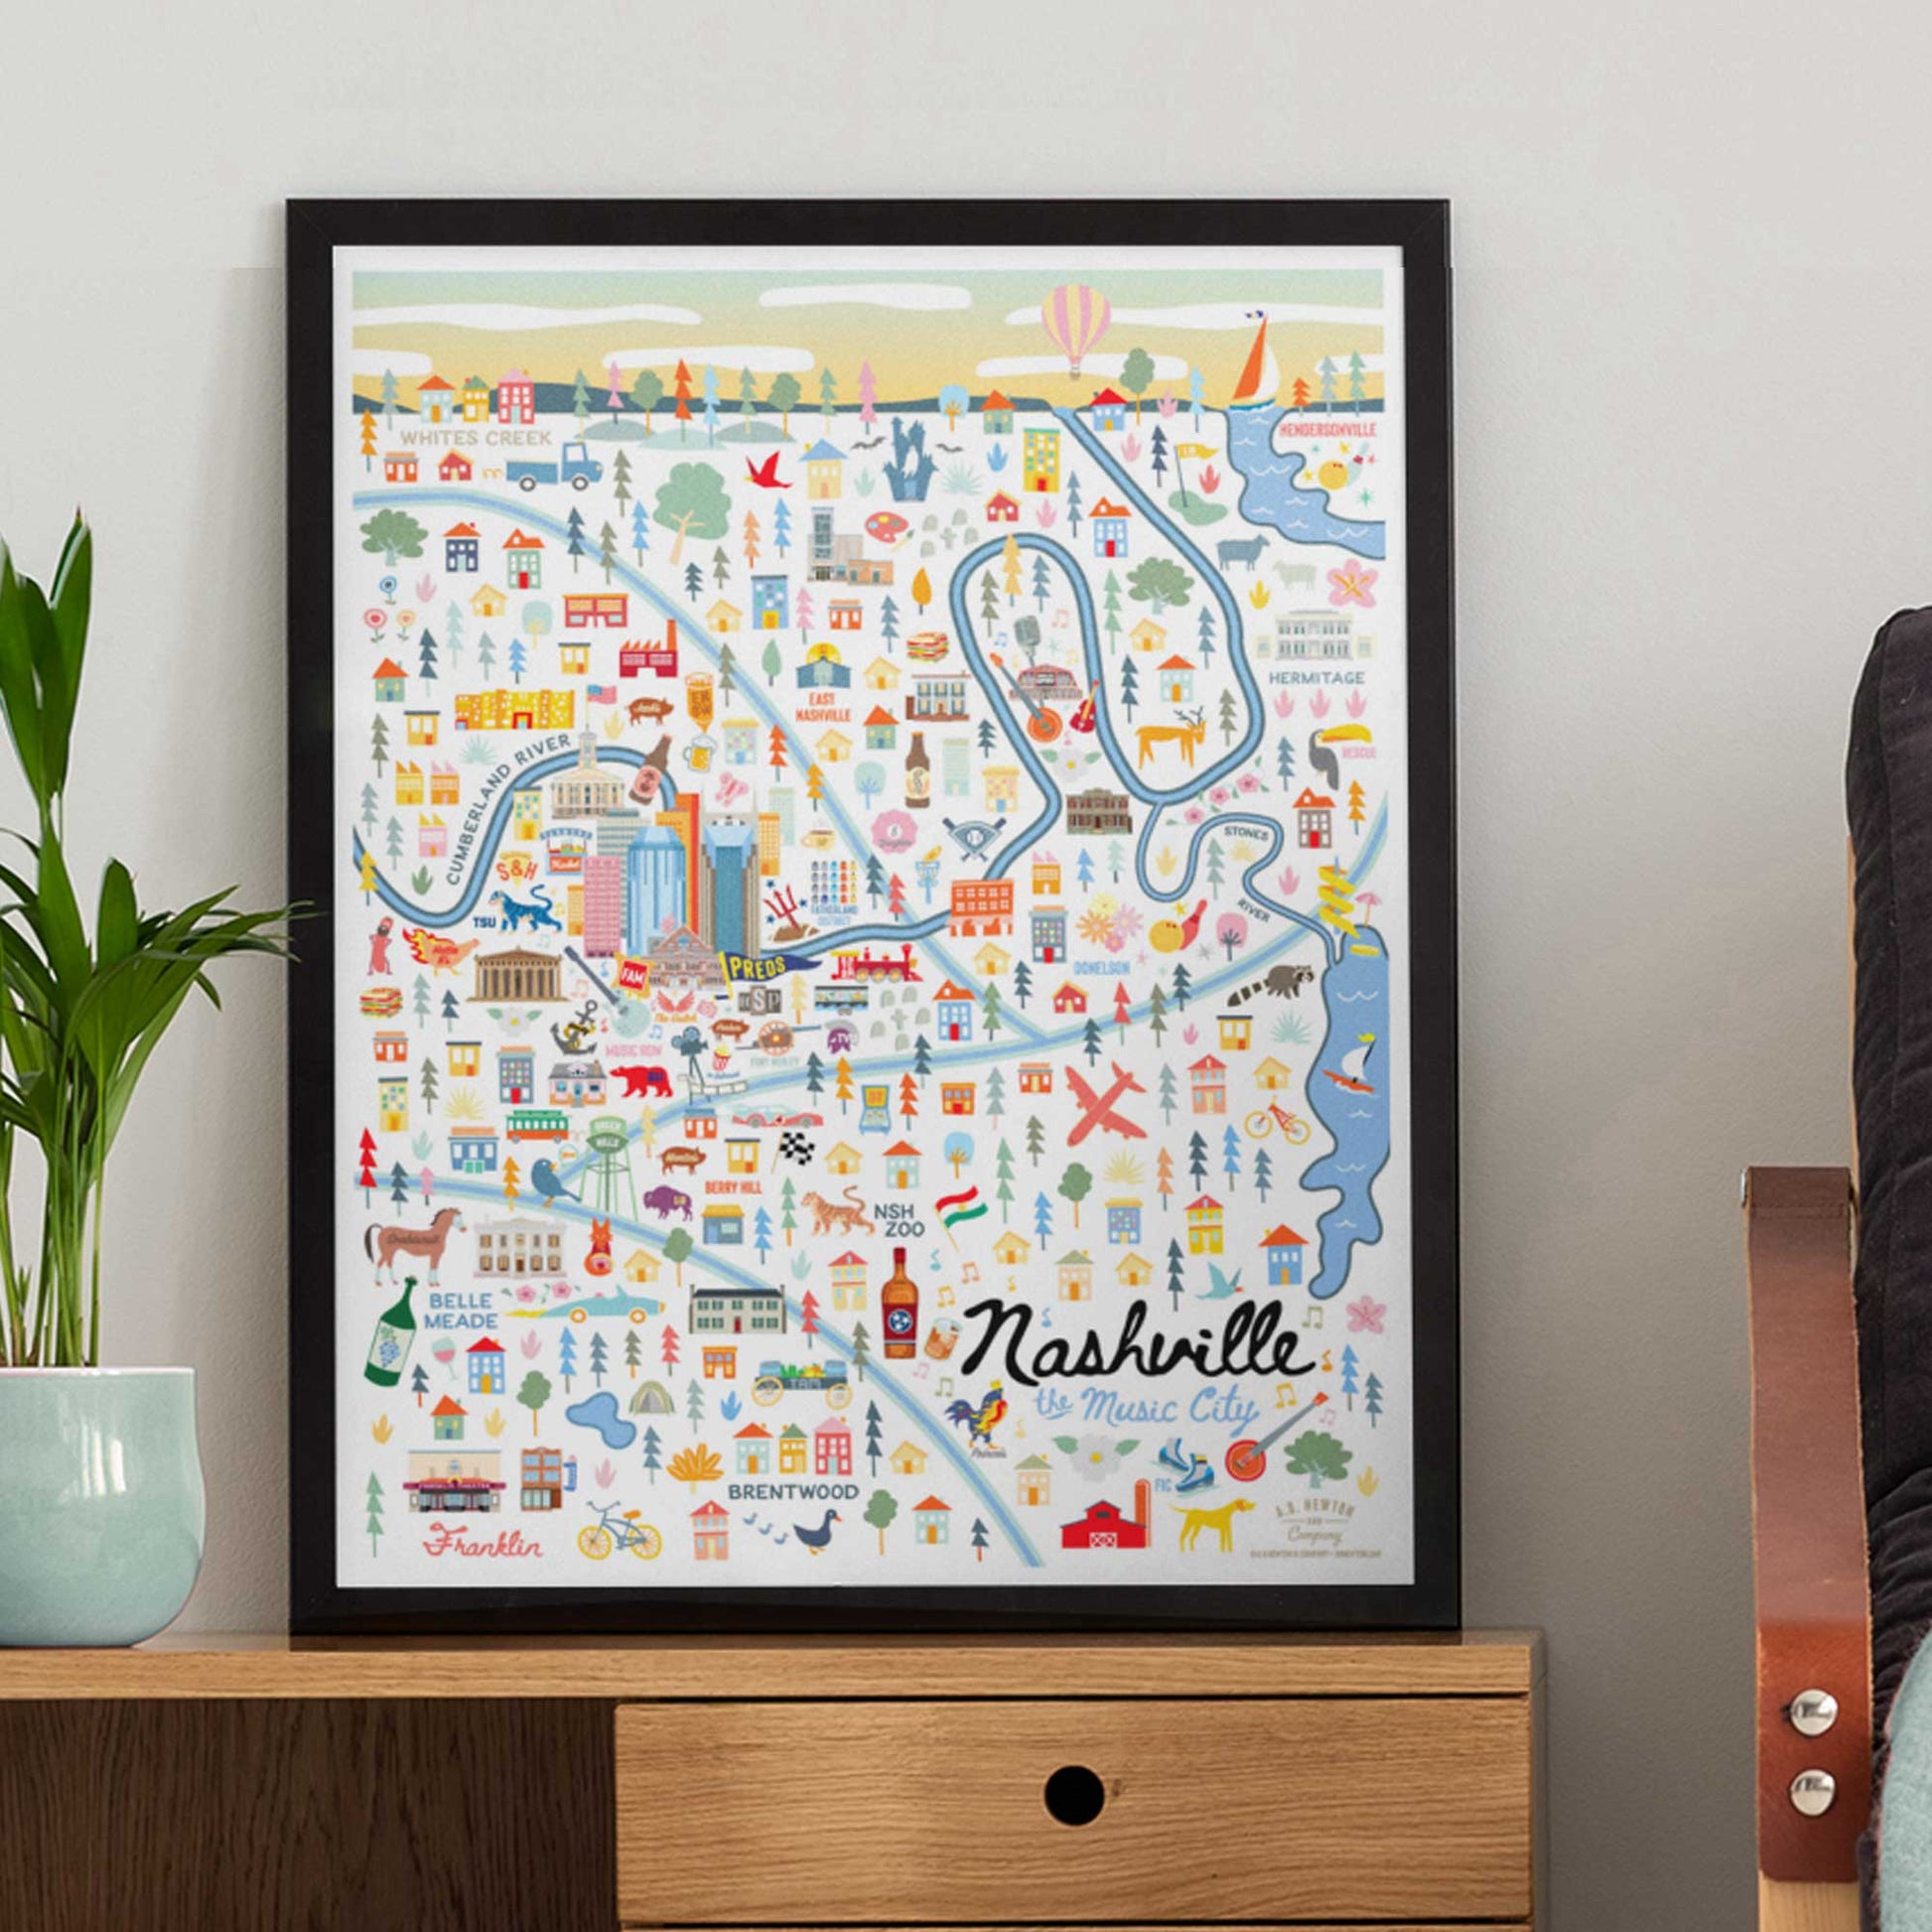 City of Nashville Tennessee | City Print Series - A. B. Newton and Company